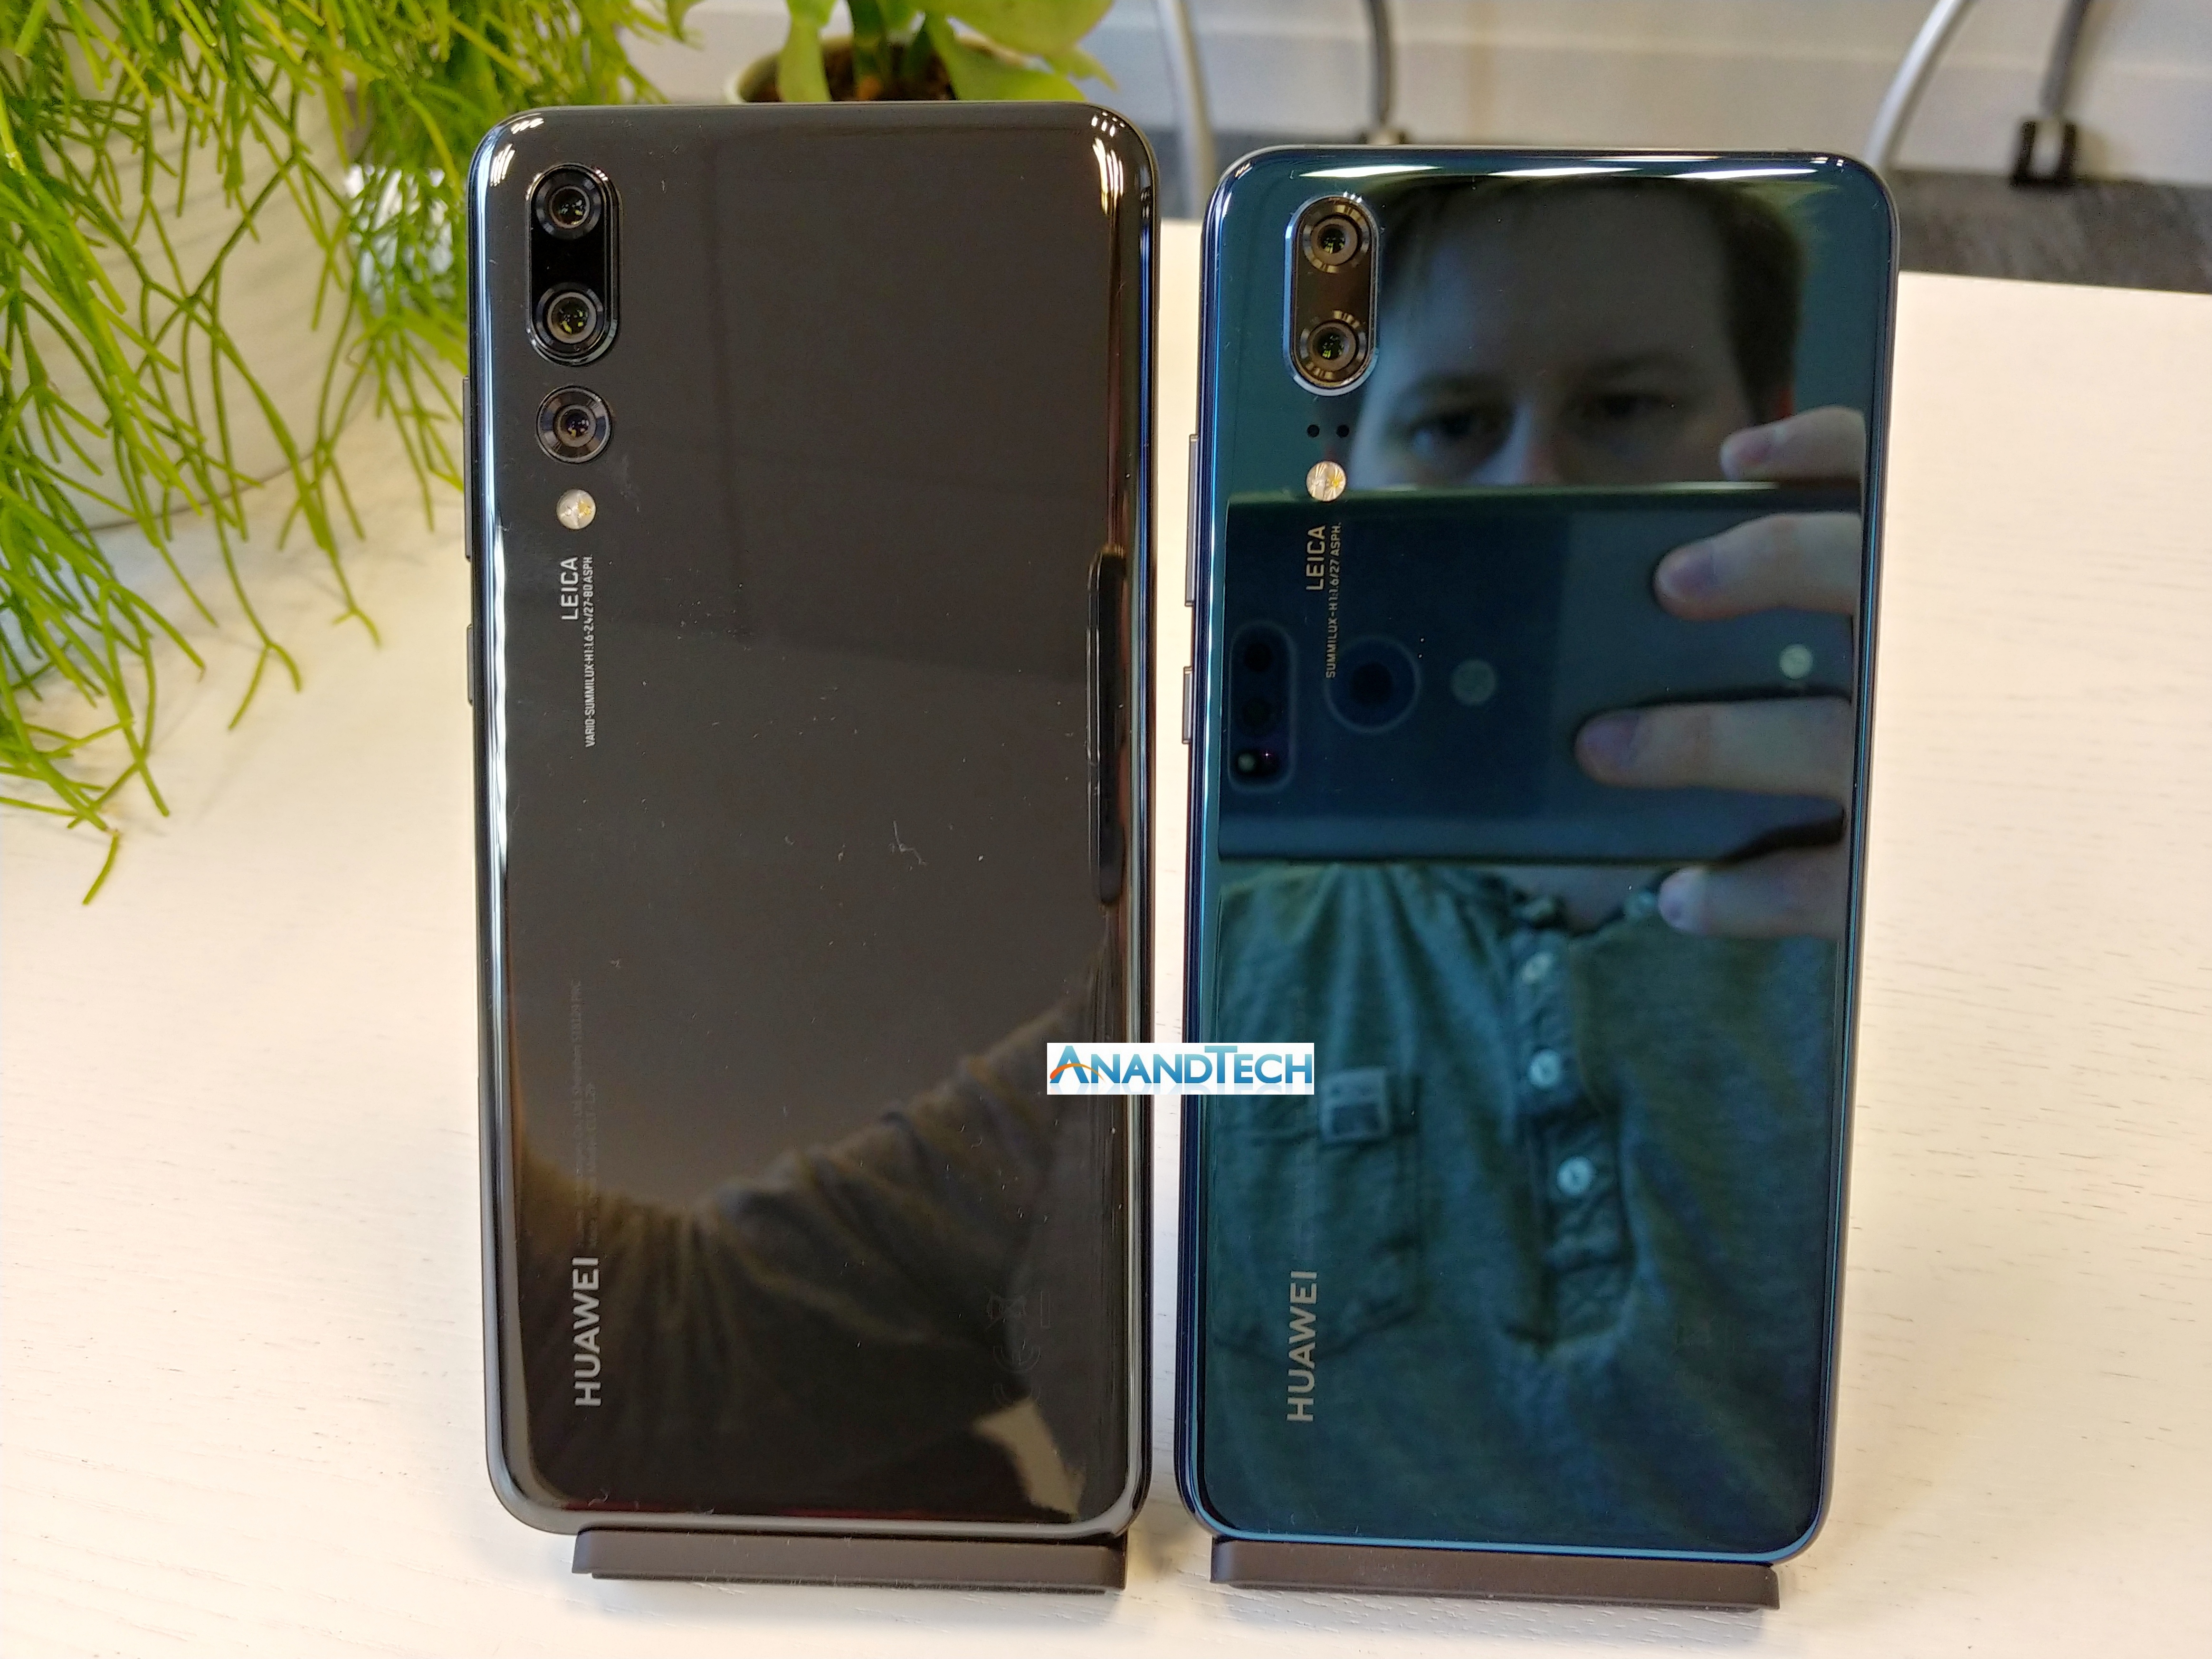 Huawei P20 and P20 Pro Hands-On: Embrace